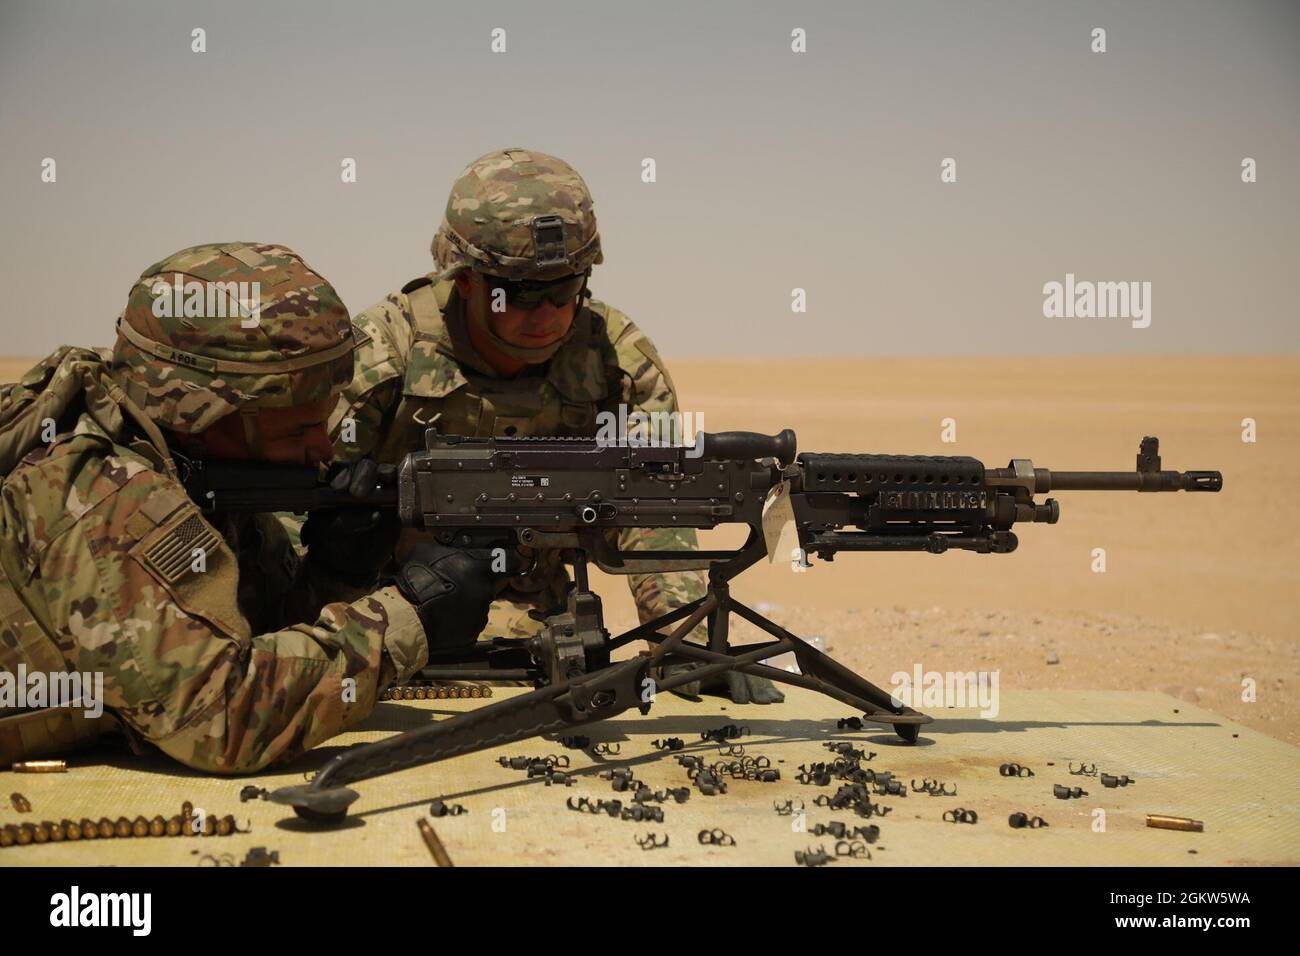 Pv2. Eduardo Vargas, a petroleum supply specialist with 247 Composite Supply Company, 393rd Combat Sustainment Battalion, attached to 3rd Division Sustainment Brigade, fires an M240B machine gun on Camp Buehring, Kuwait, June 6. The qualification was conducted to increase weapons readiness and lethality for future missions. Stock Photo